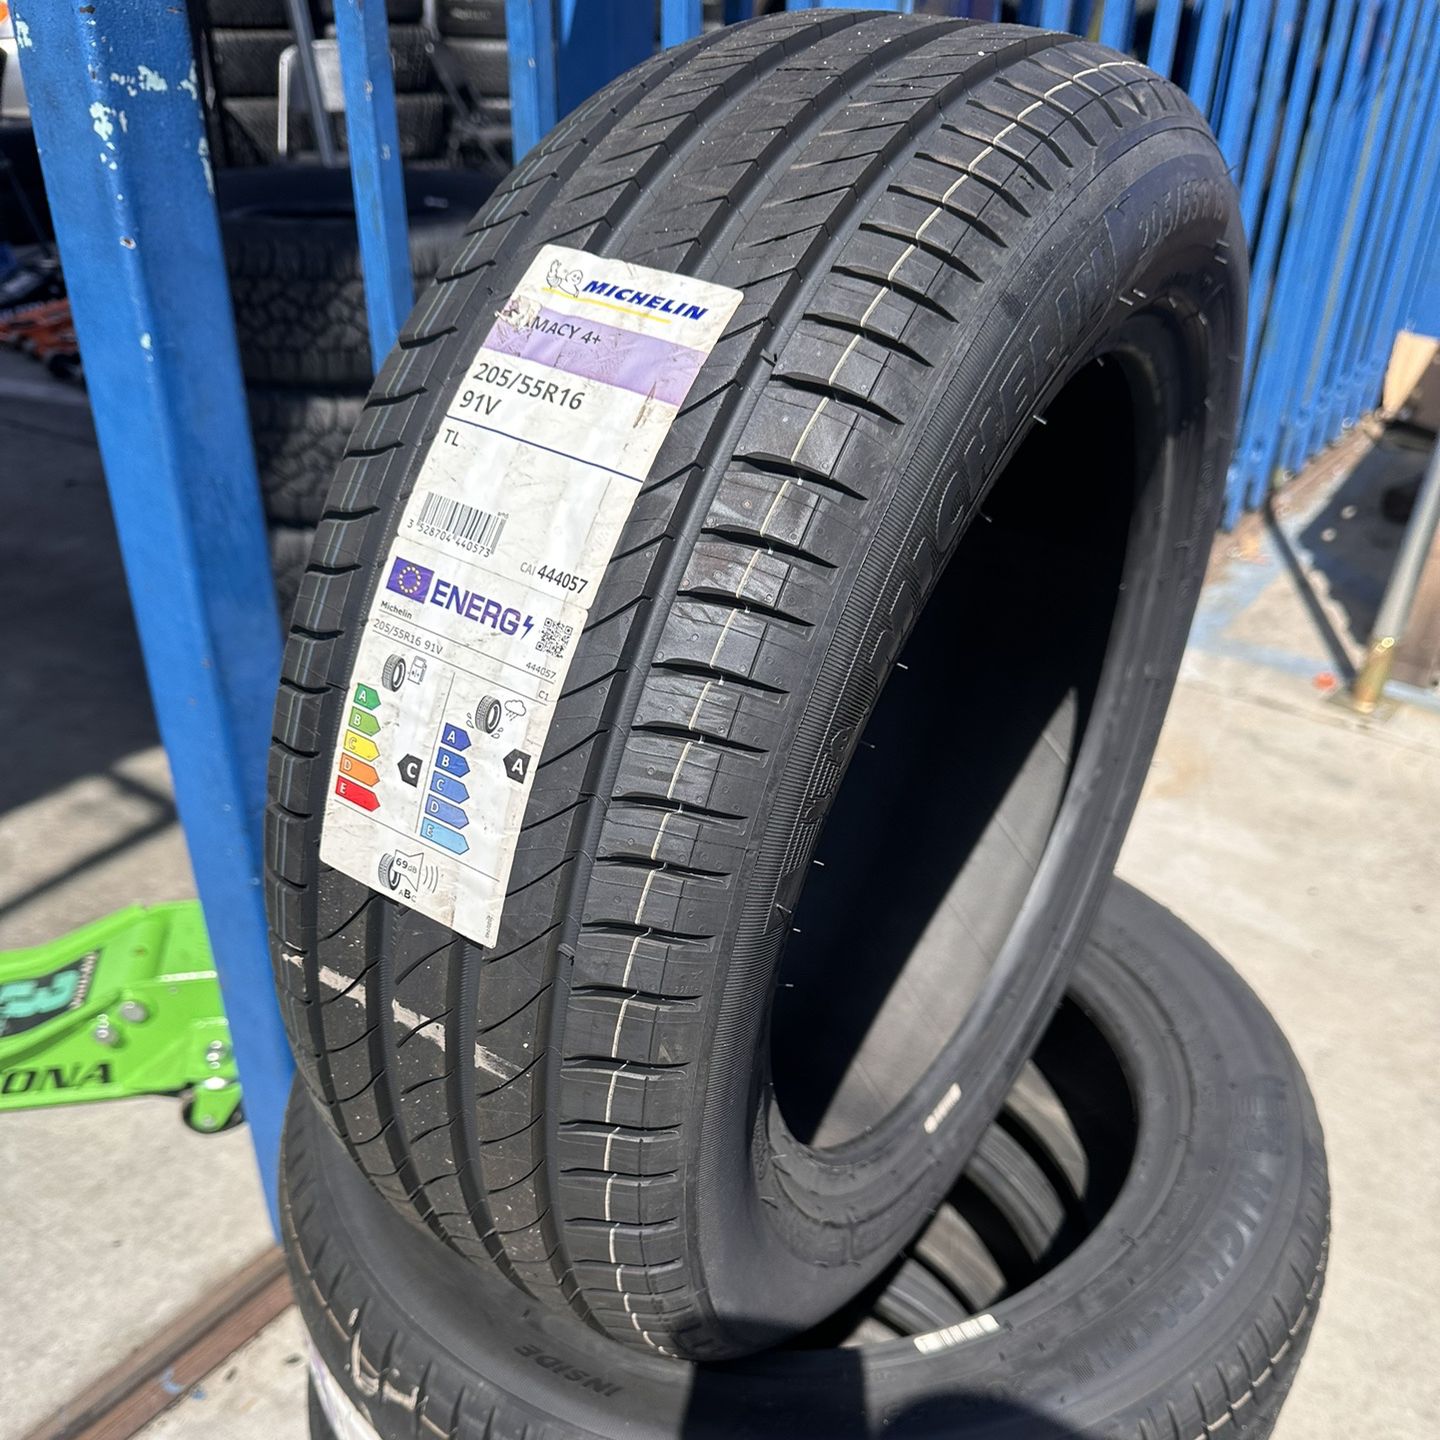 205/55/16 Michelin Set Of 4 New Tires Installed And Balanced 